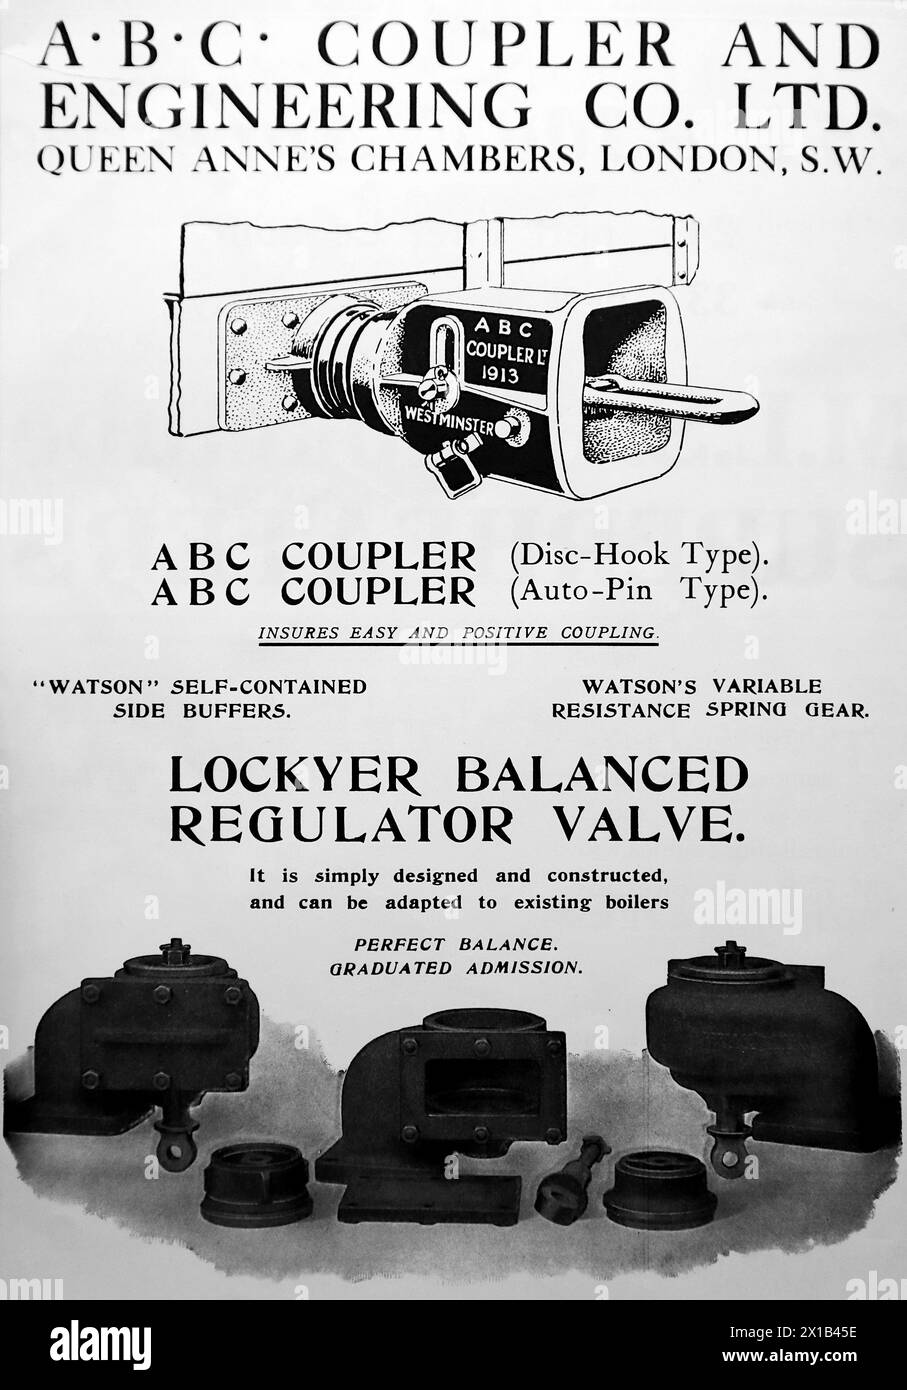 Advertisement for ABC Coupler and Engineering Co Ltd, of south-west London. Pictured are a coupler and a Lockyer balanced regulator valve. From an original publication dated 15 May 1924, this helps to give an insight into public transport, and the railways in particular, of the 1920s. Stock Photo